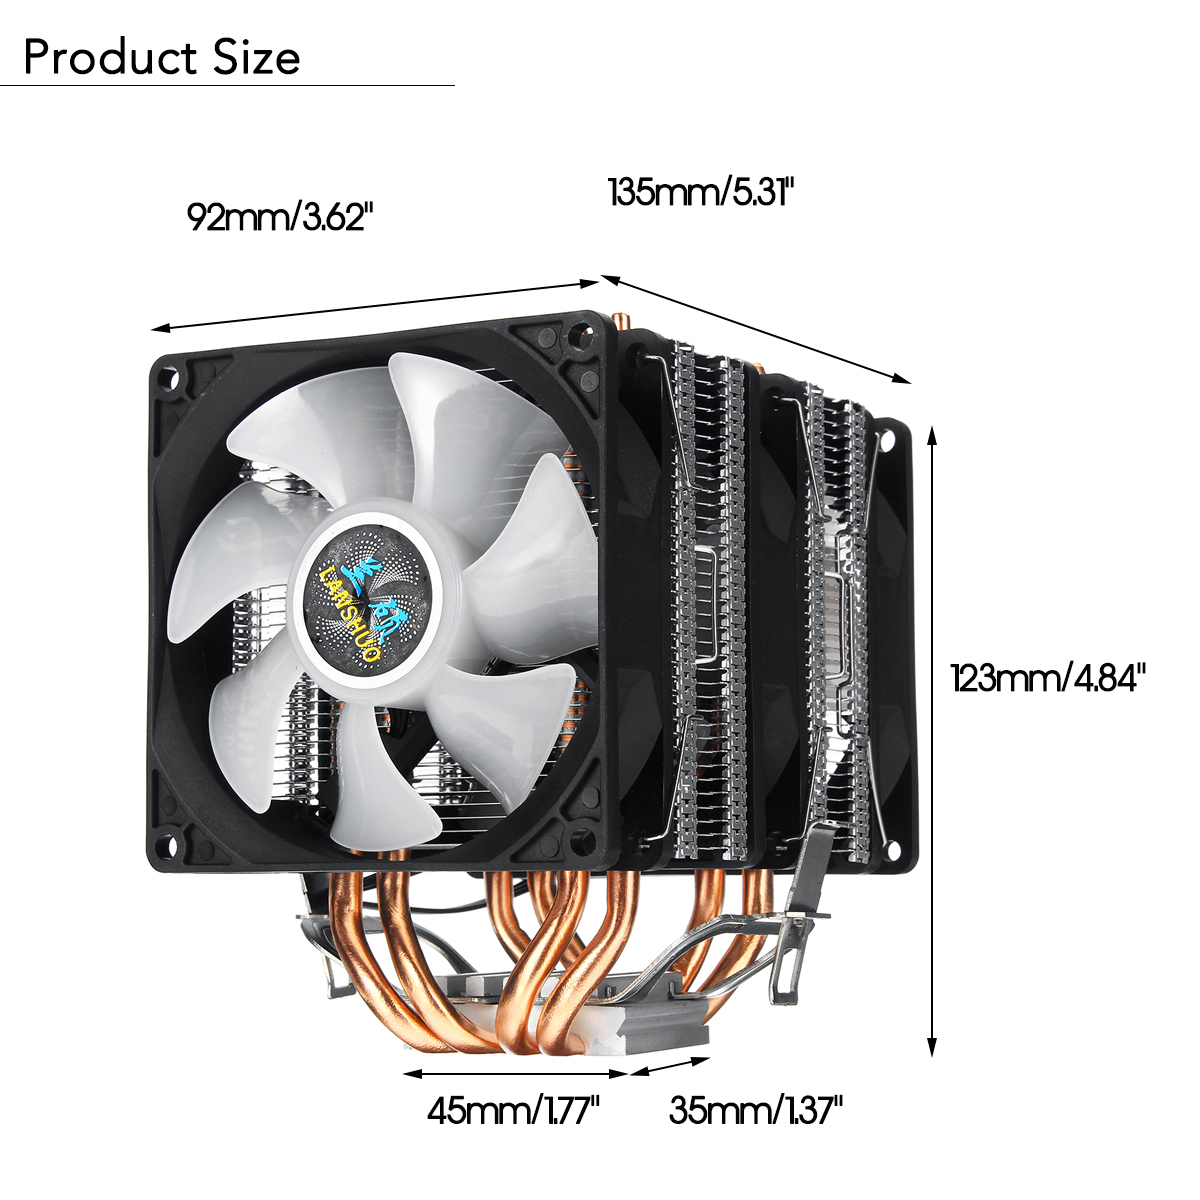 3 Pin Triple Fans Four Copper Heat Pipes Colorful LED Light CPU Cooling Fan Cooler Heatsink for Intel AMD 17